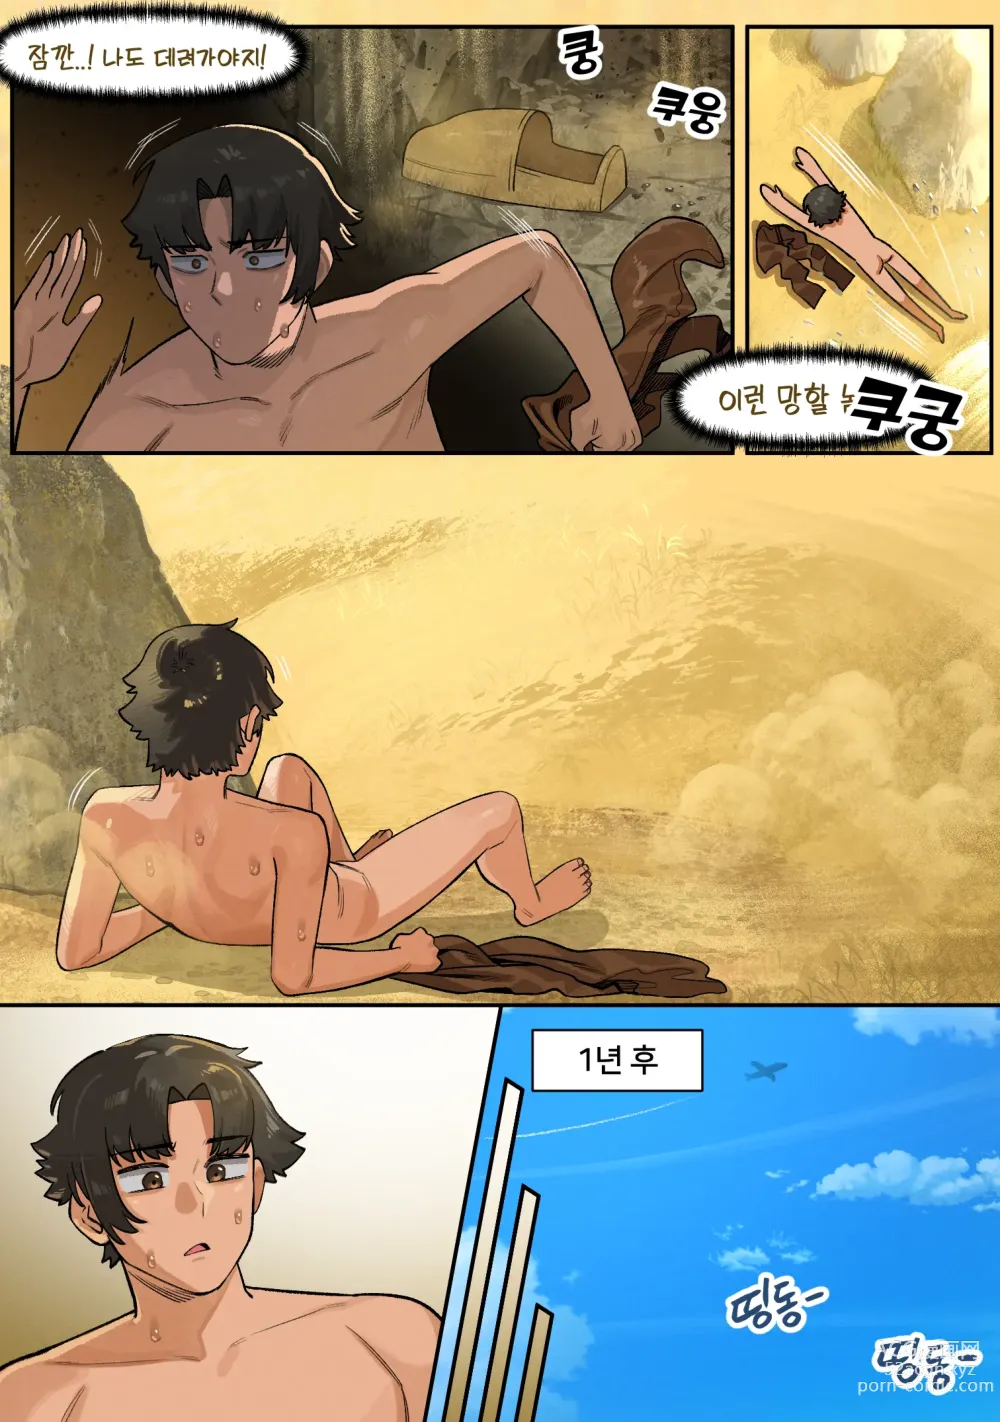 Page 8 of doujinshi Mummy (uncensored)